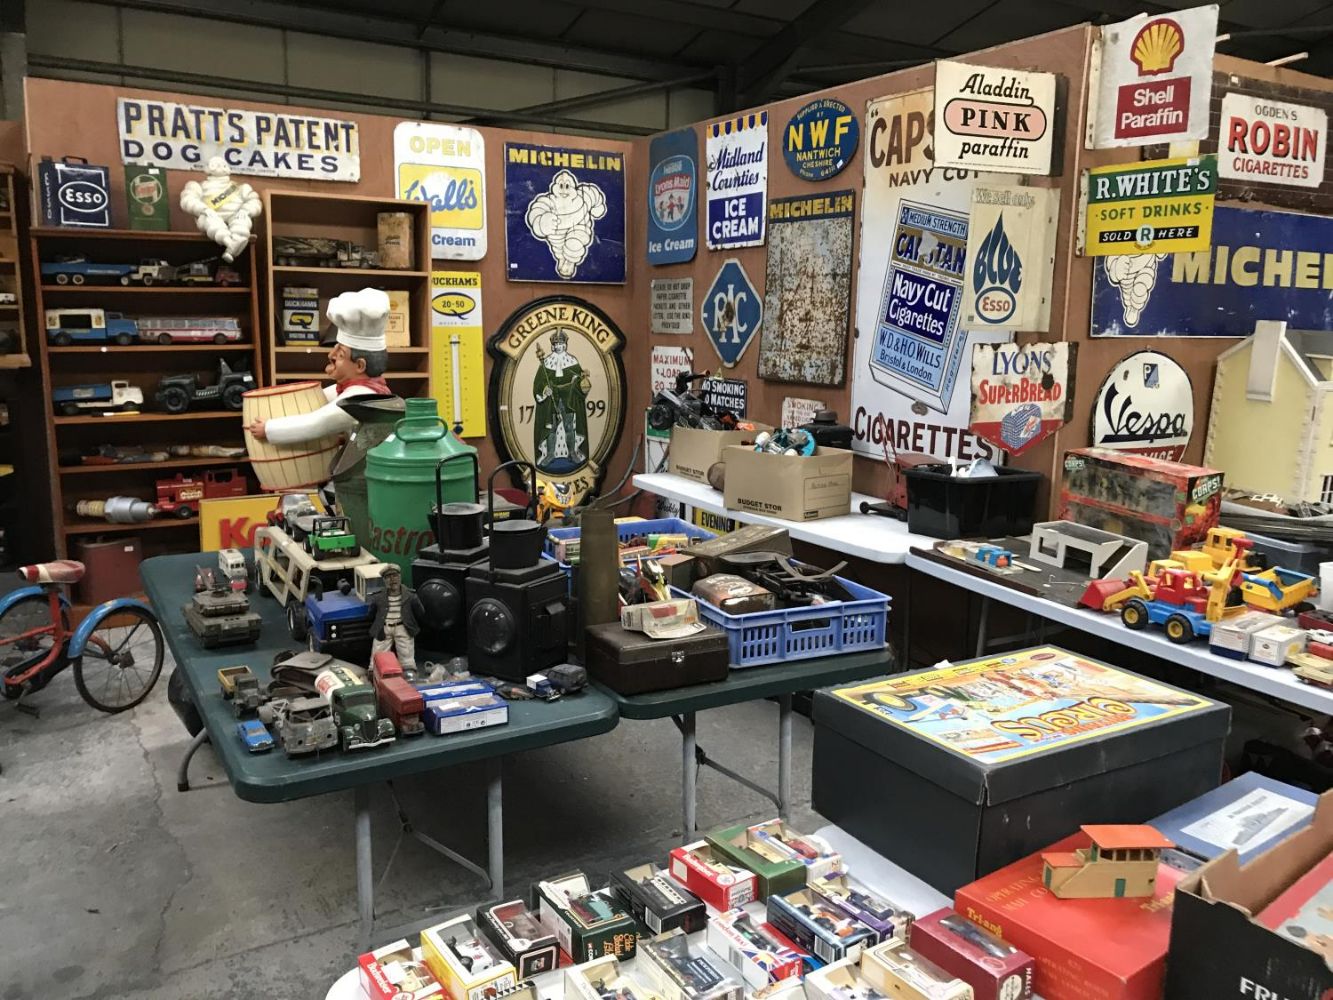 TWO DAY AUCTION OF COLLECTABLES, ANTIQUES, JEWELLERY, FURNITURE, VINTAGE ITEMS, TOOLS ETC